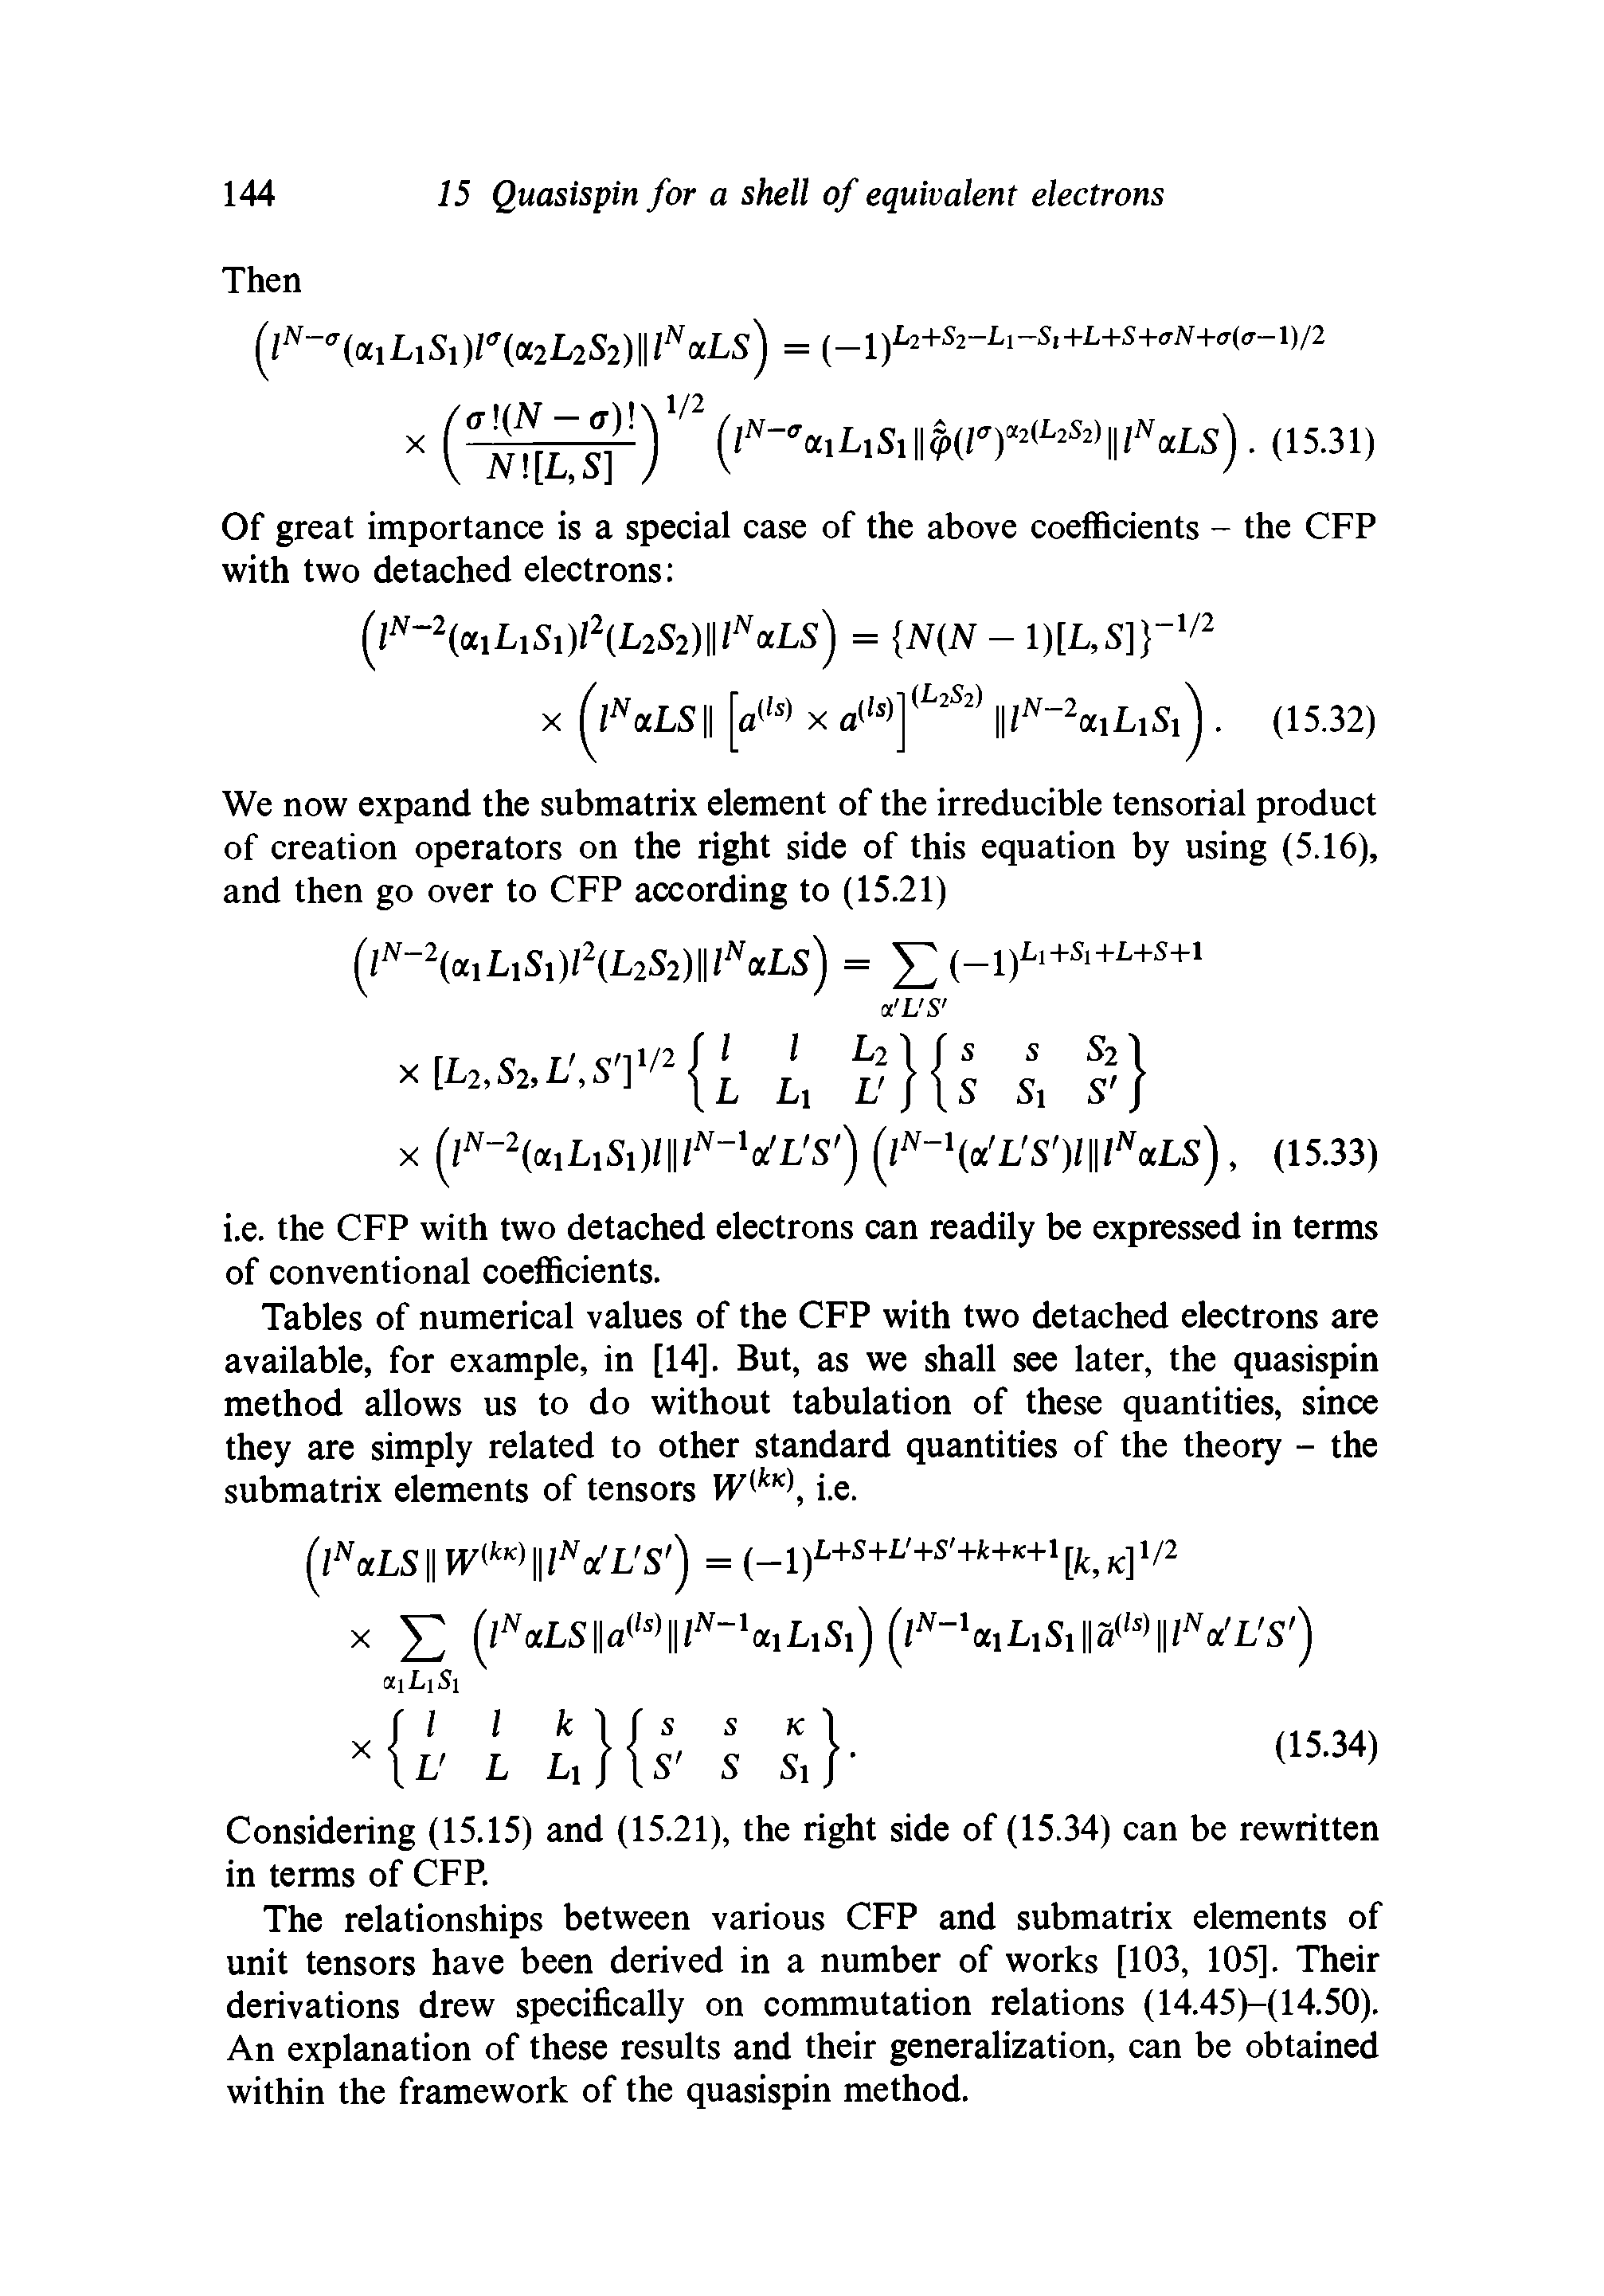 Tables of numerical values of the CFP with two detached electrons are available, for example, in [14]. But, as we shall see later, the quasispin method allows us to do without tabulation of these quantities, since they are simply related to other standard quantities of the theory - the submatrix elements of tensors W kK i.e.